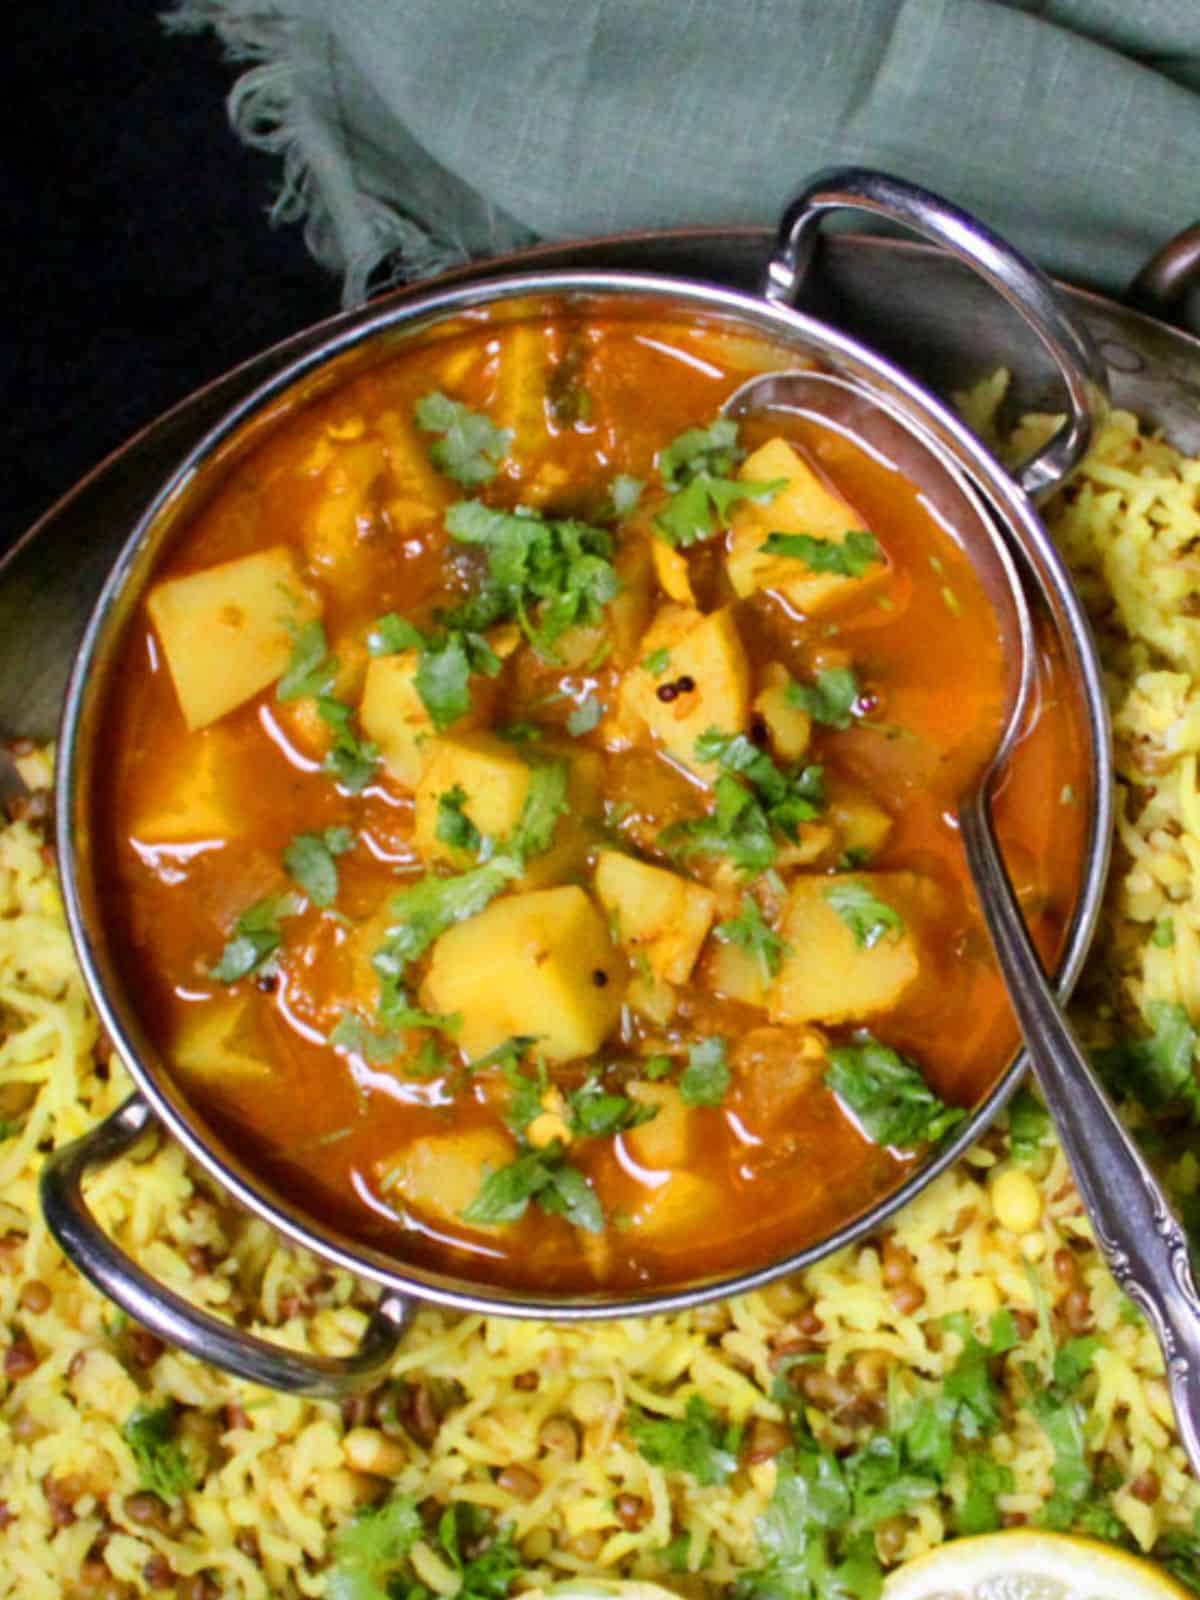 Potato curry in bowl on a bed of khichdi rice.